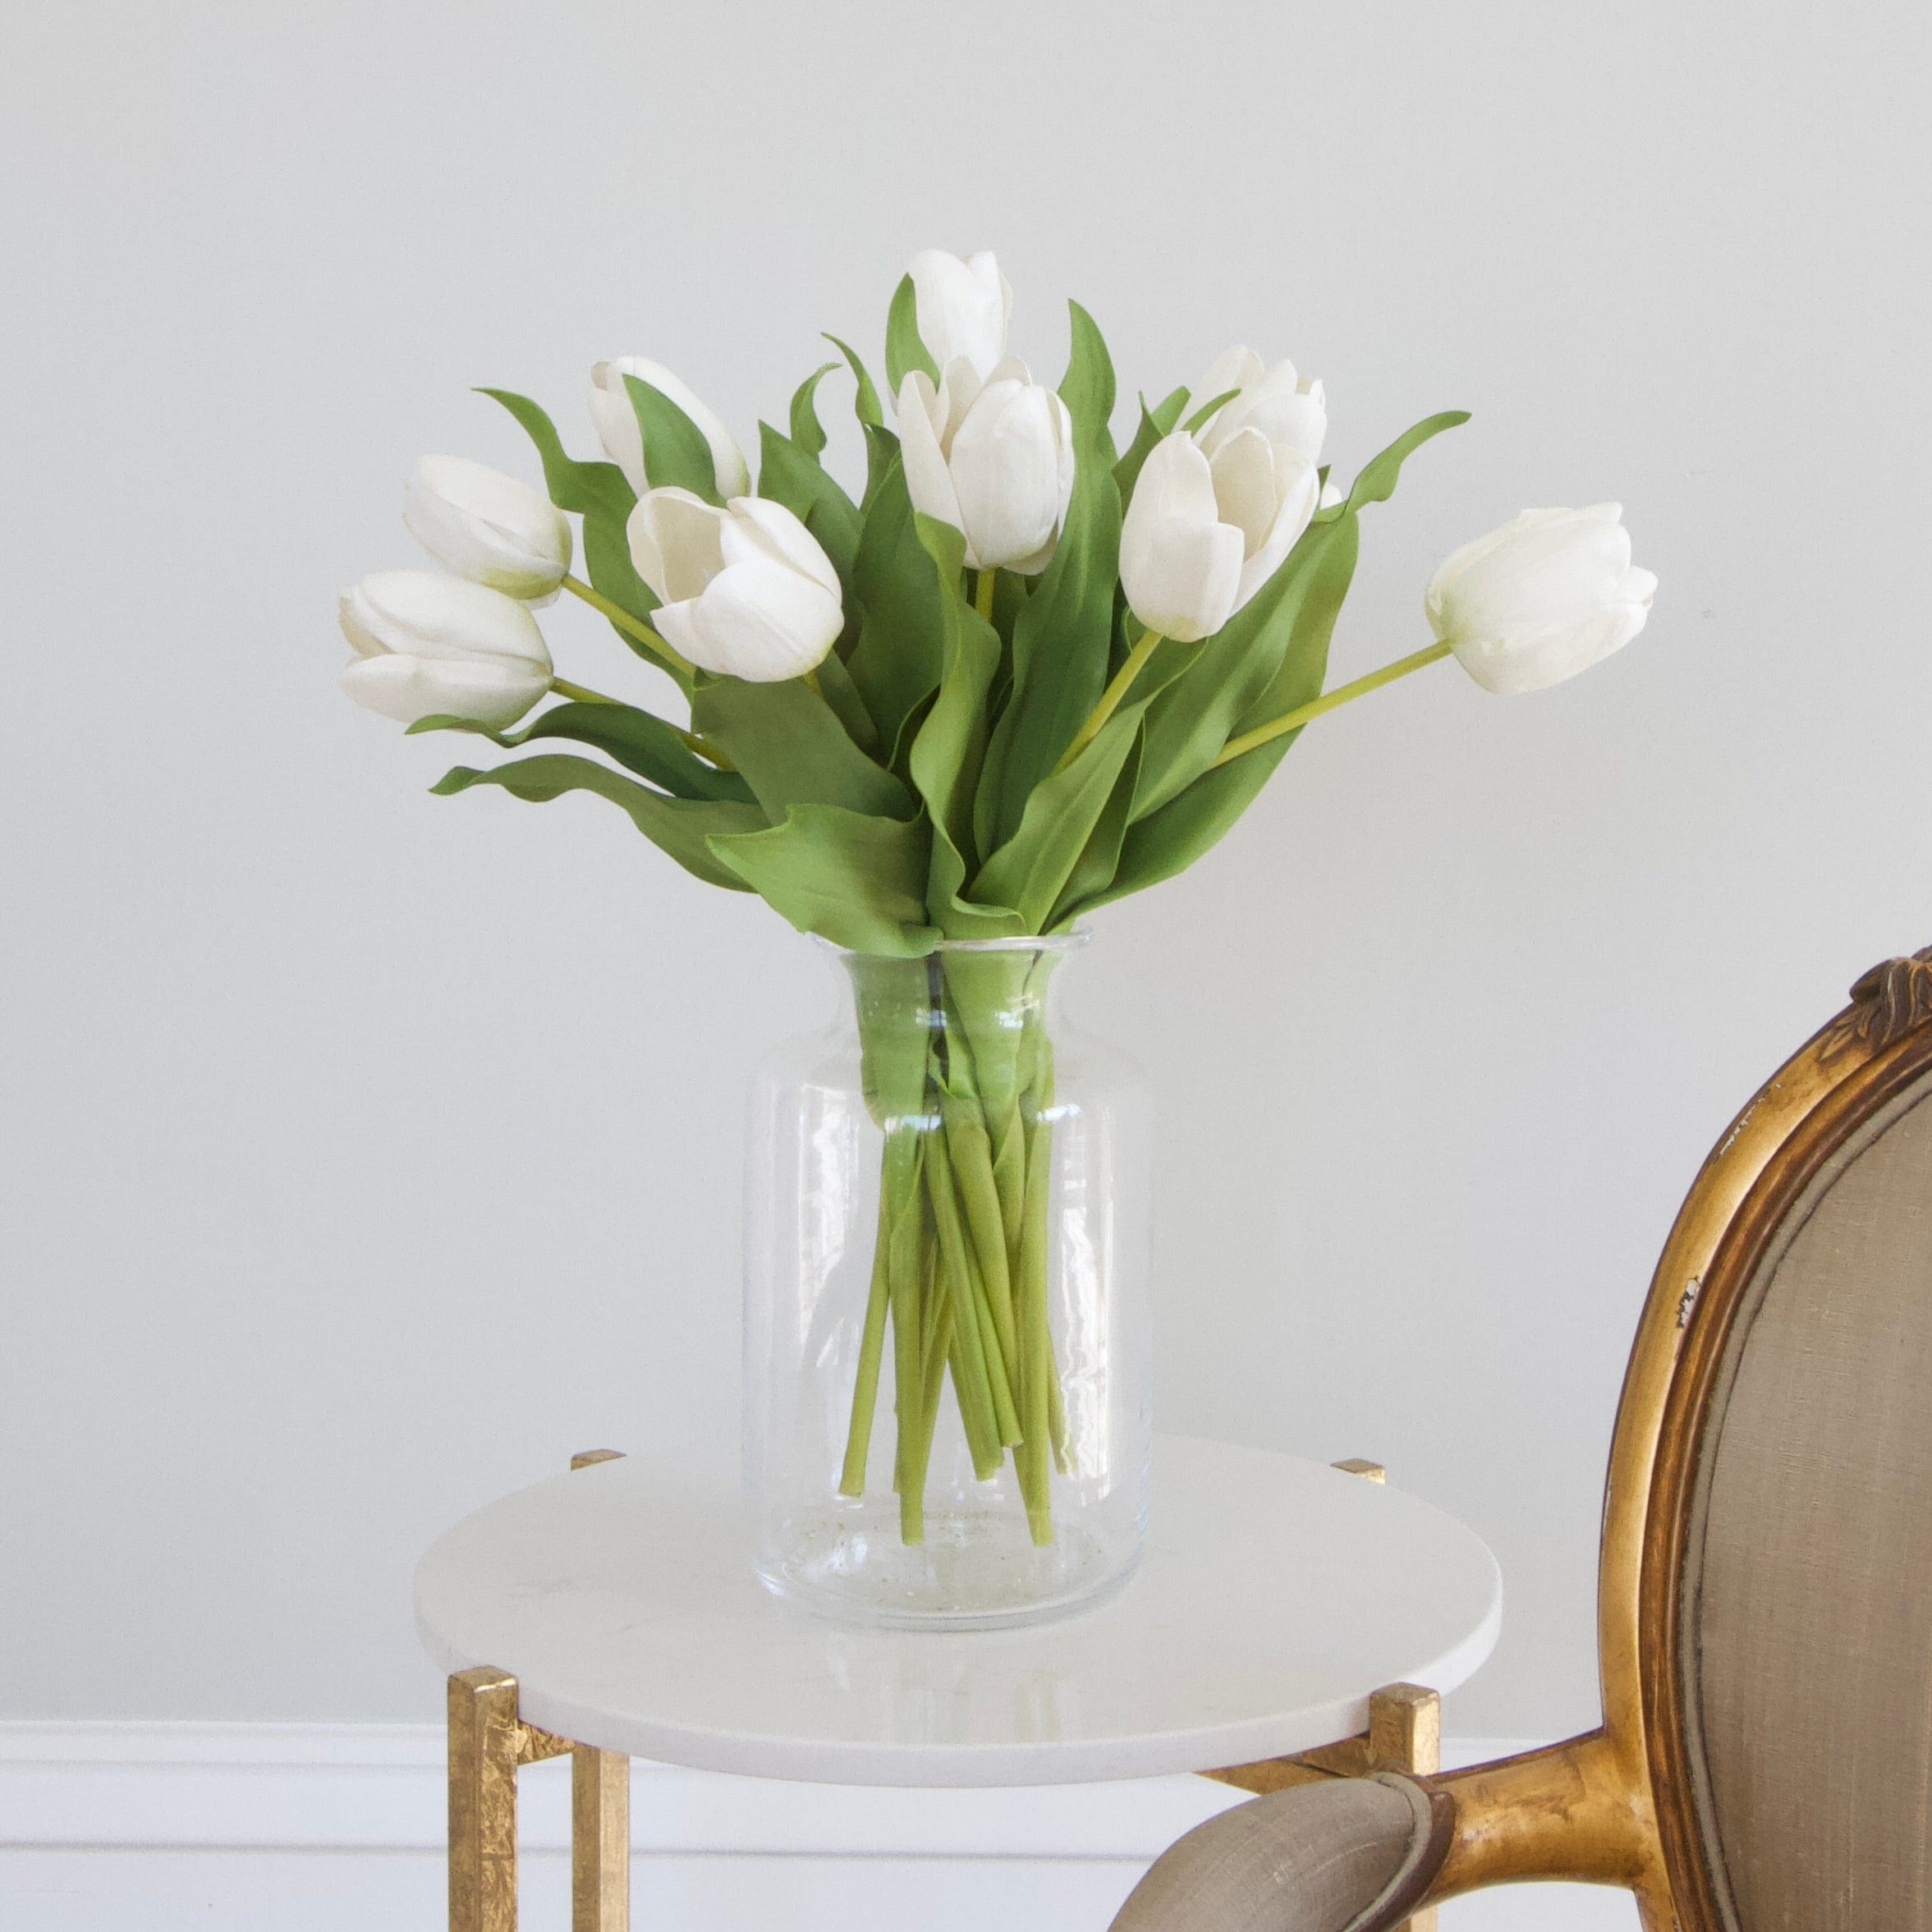 Luxury Lifelike Realistic Artificial Fabric Silk Blooms with Foliage Buy Online from The Faux Flower Company | 12 stems of Short Open White Tulip ABY2618WH styled in Clear Glass Medium Funnel Neck Vase ABV2252